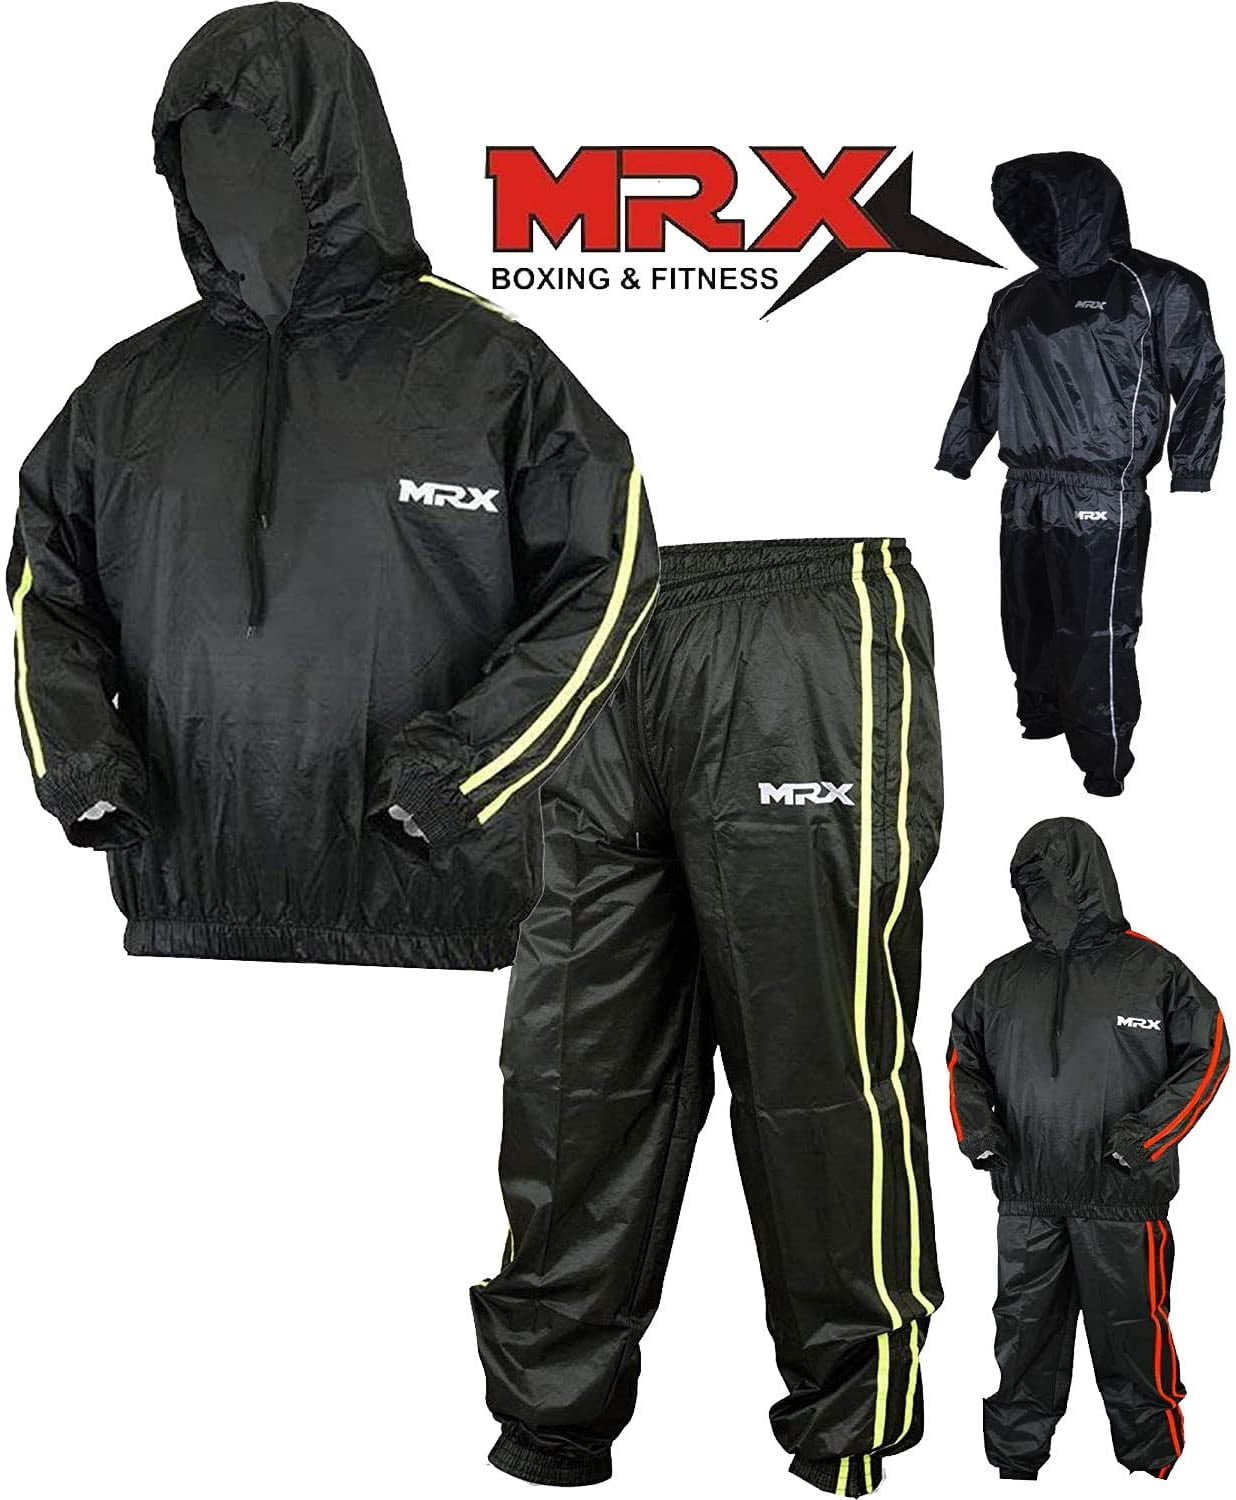 Sauna Suit Heavy Duty Sweat Suit Exercise Gym Suit Fitness Weight Loss with Hood 